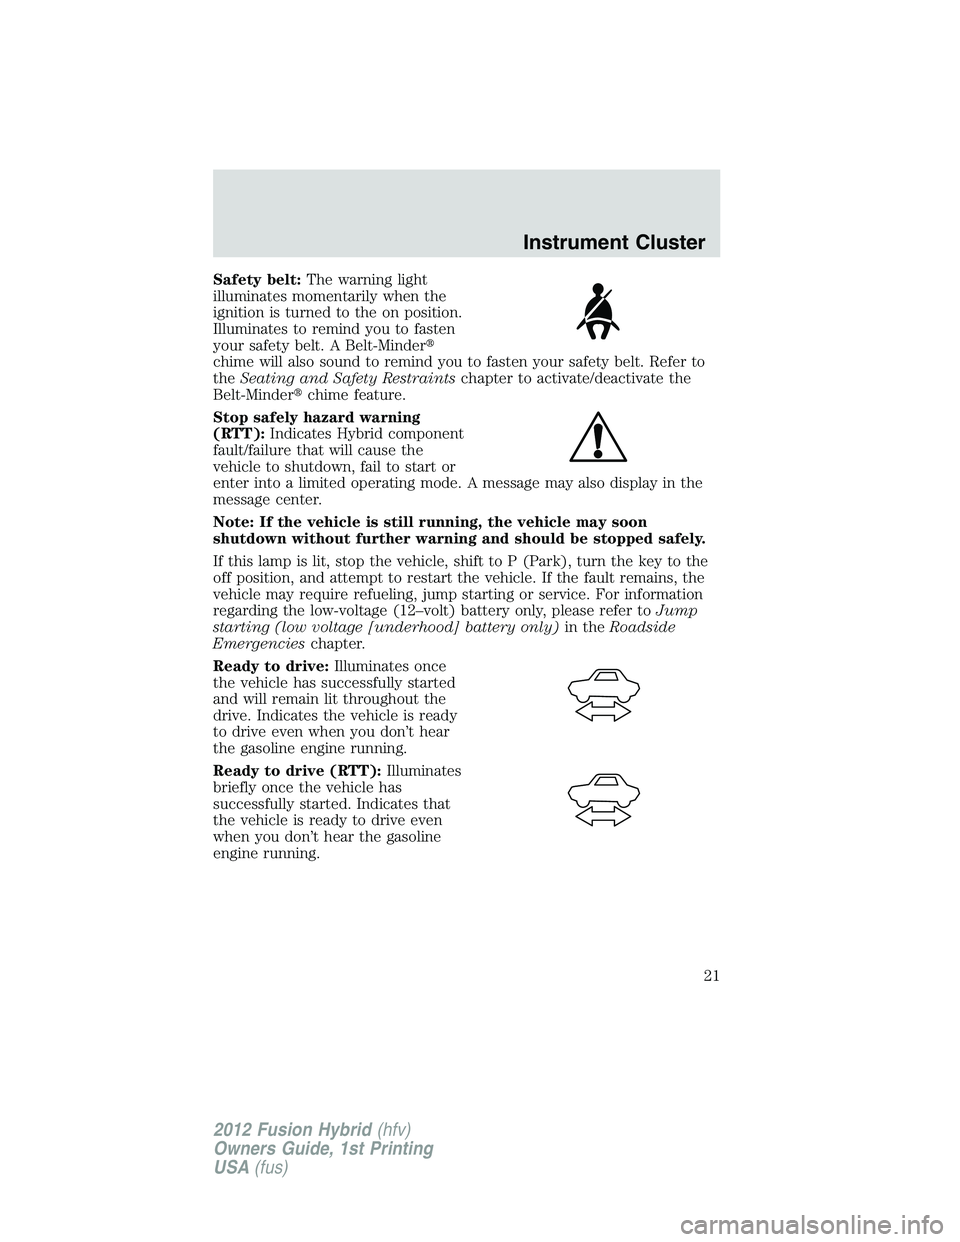 FORD FUSION HYBRID 2012  Owners Manual Safety belt:The warning light
illuminates momentarily when the
ignition is turned to the on position.
Illuminates to remind you to fasten
your safety belt. A Belt-Minder
chime will also sound to remi